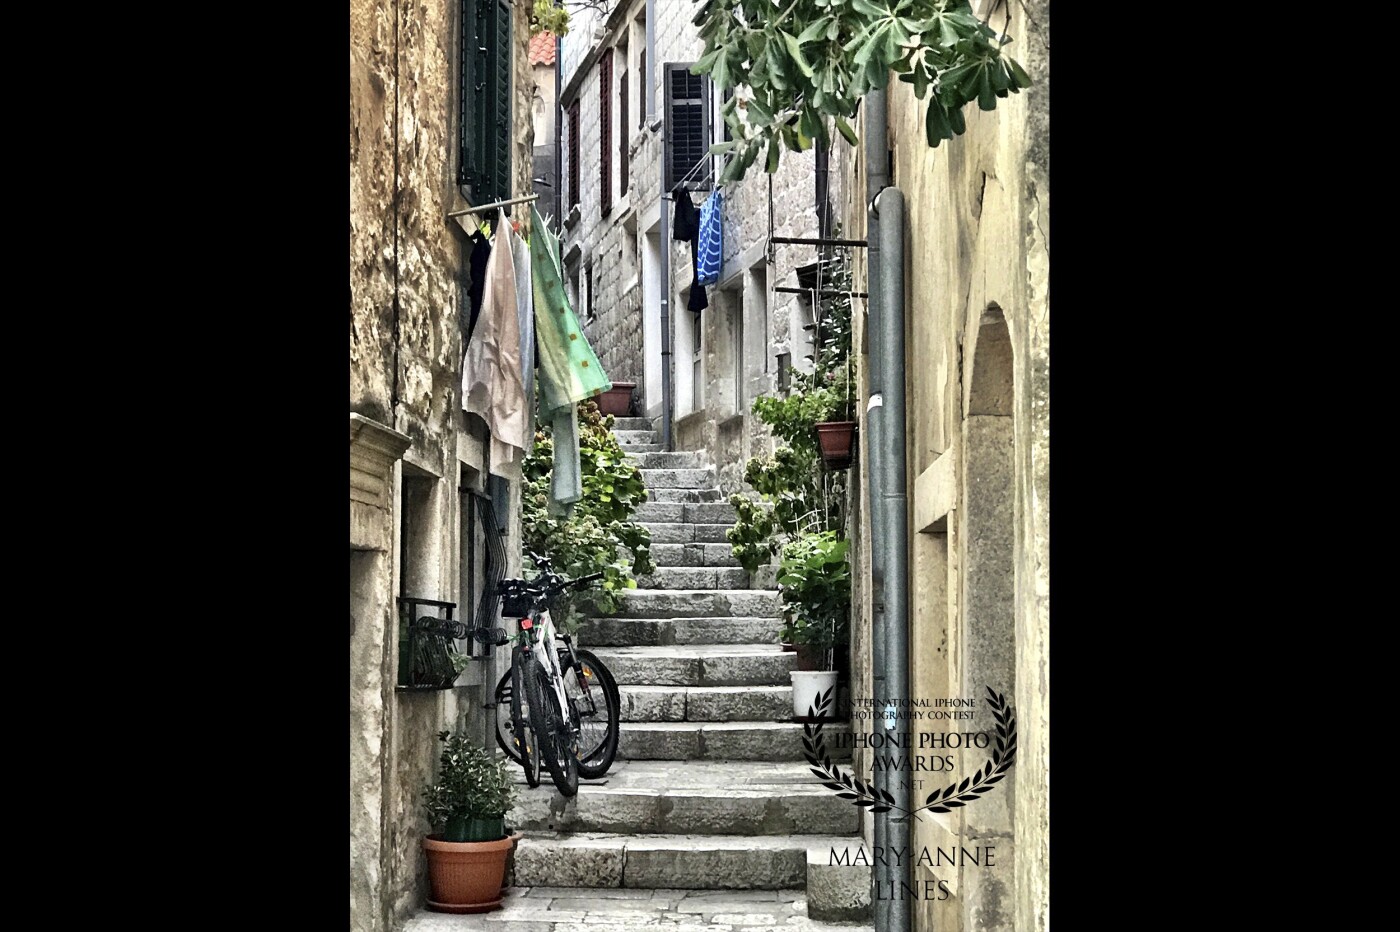 Korčula - one of the islands off the Dalmatian Coast, meandering the streets, don’t you just want to walk up those stairs and see where they take you?